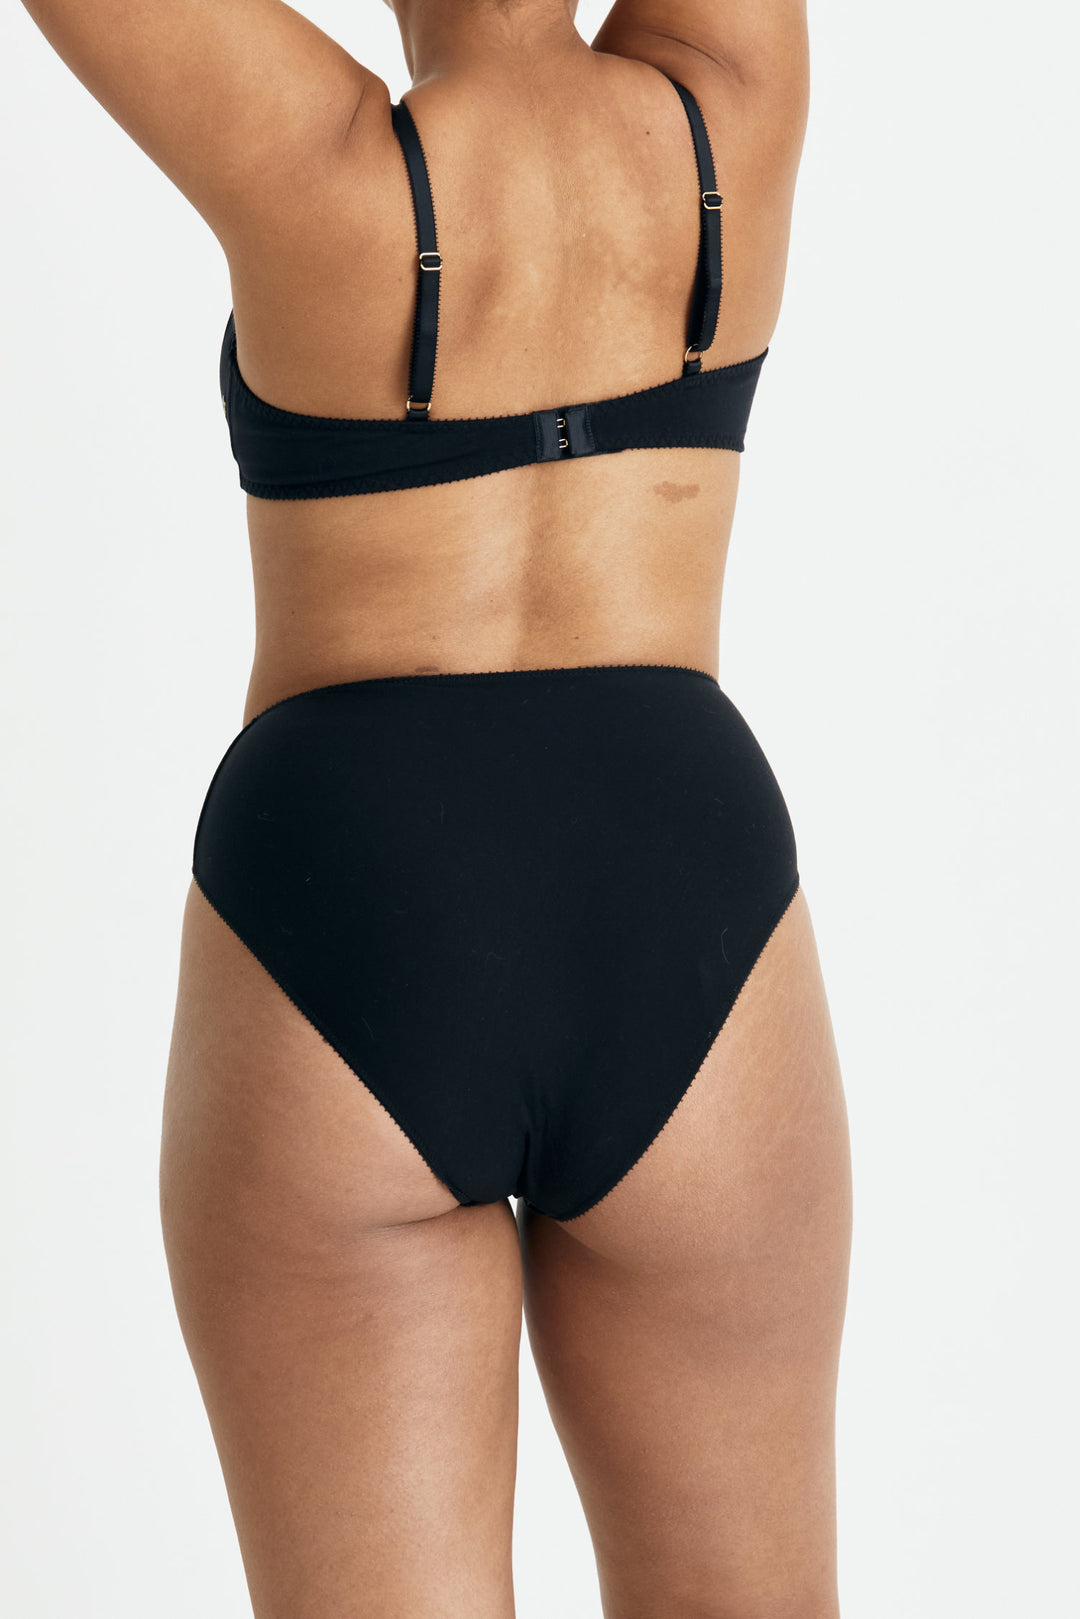 Videris Lingerie high waist knicker in black blossom embroidered TENCEL™ with cheeky bottom coverage